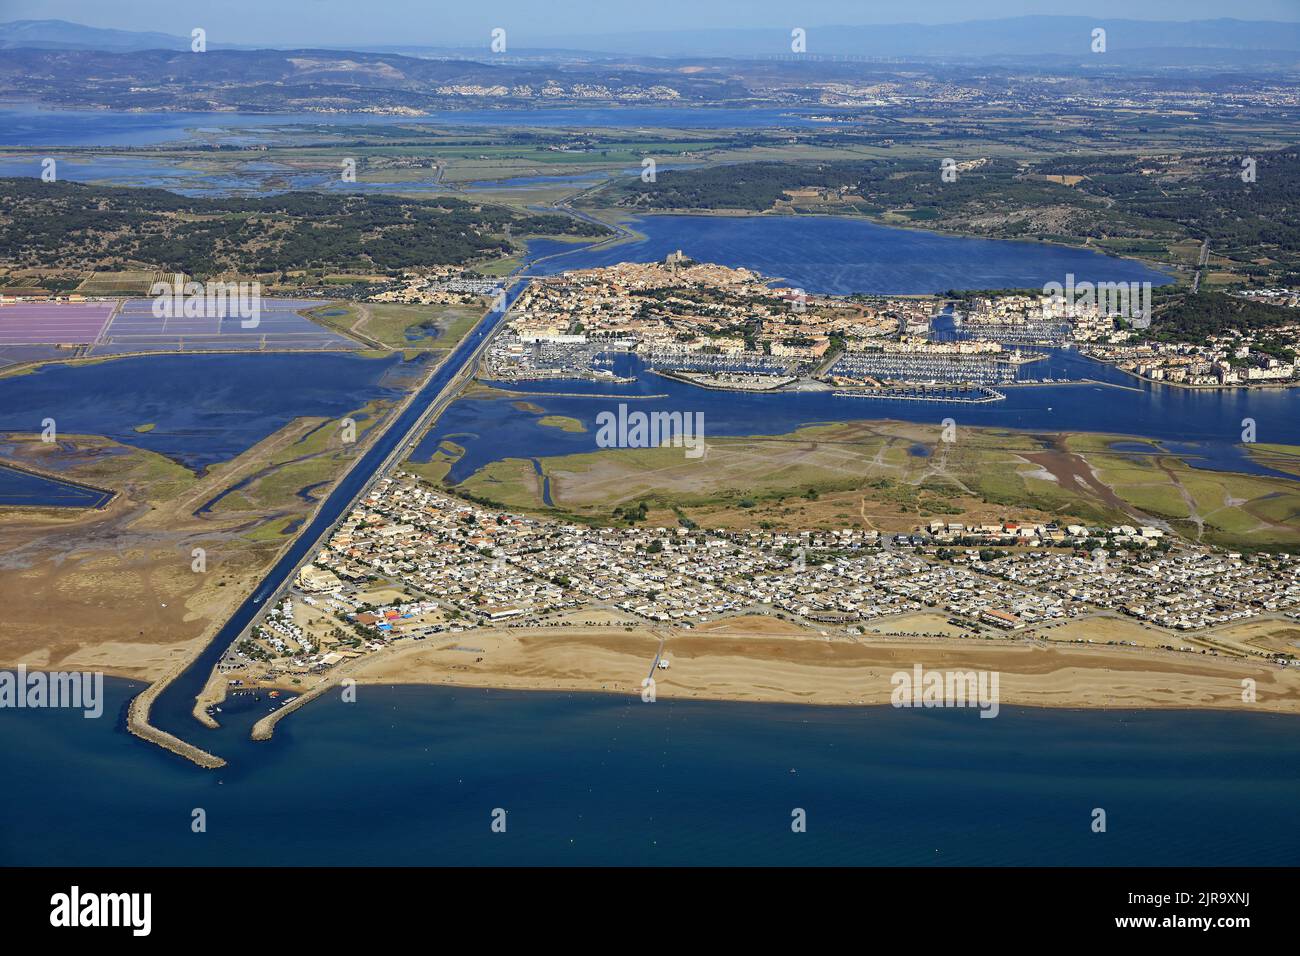 Gruissan (south of France): aerial view of the seaside resort along the coast of the Lion Gulf and the harbour between the Clape Massif and the Medite Stock Photo